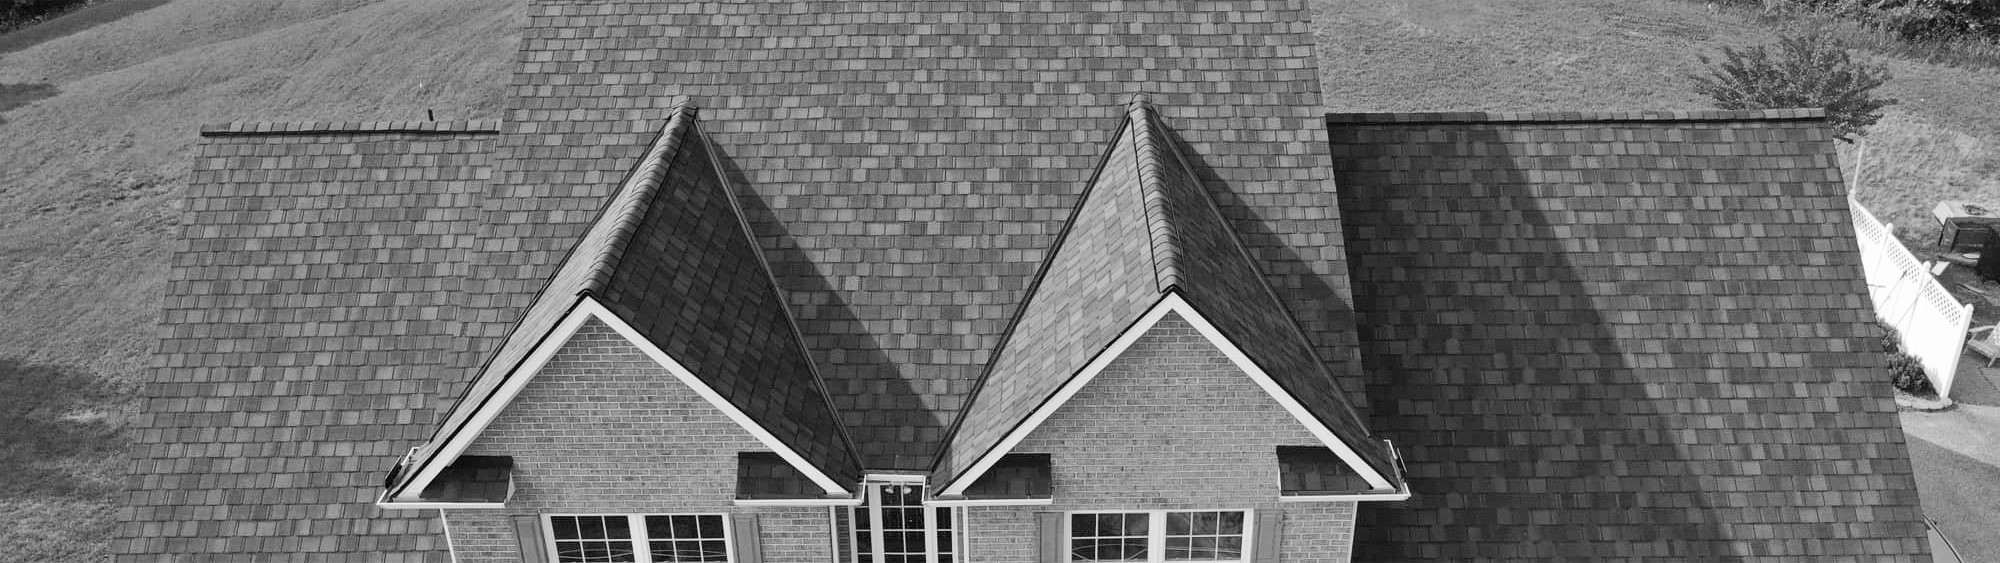 Moraine Residential Roofing Company